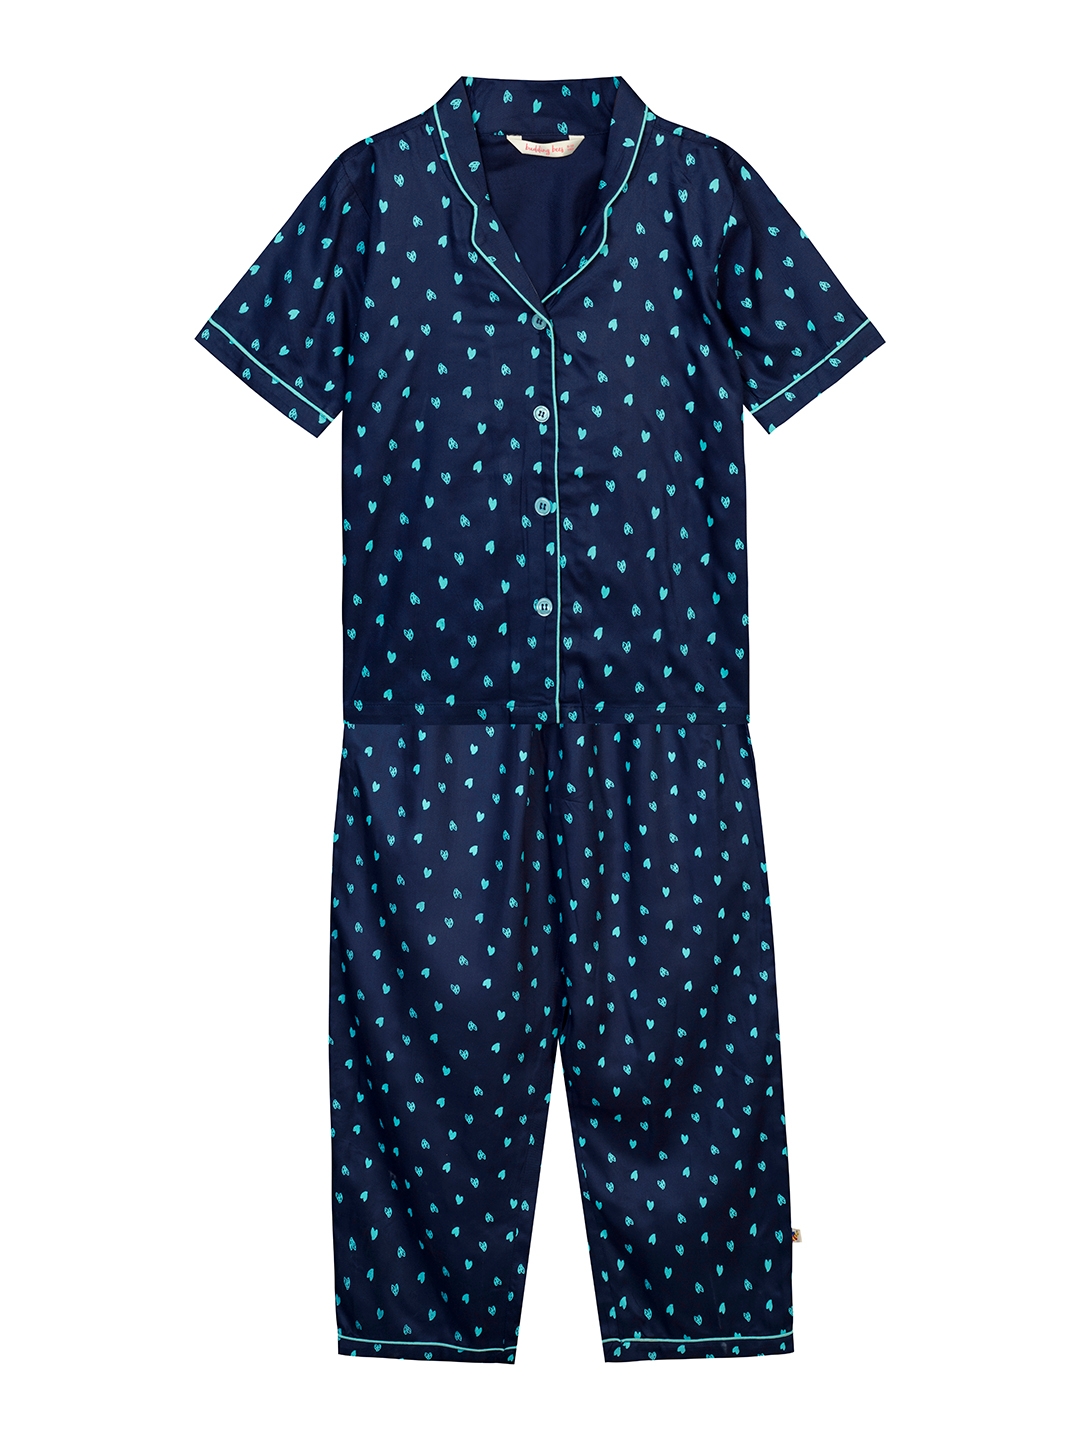 Budding Bees | Budding Bees Girls Blue Heart Printed Nightsuit 0